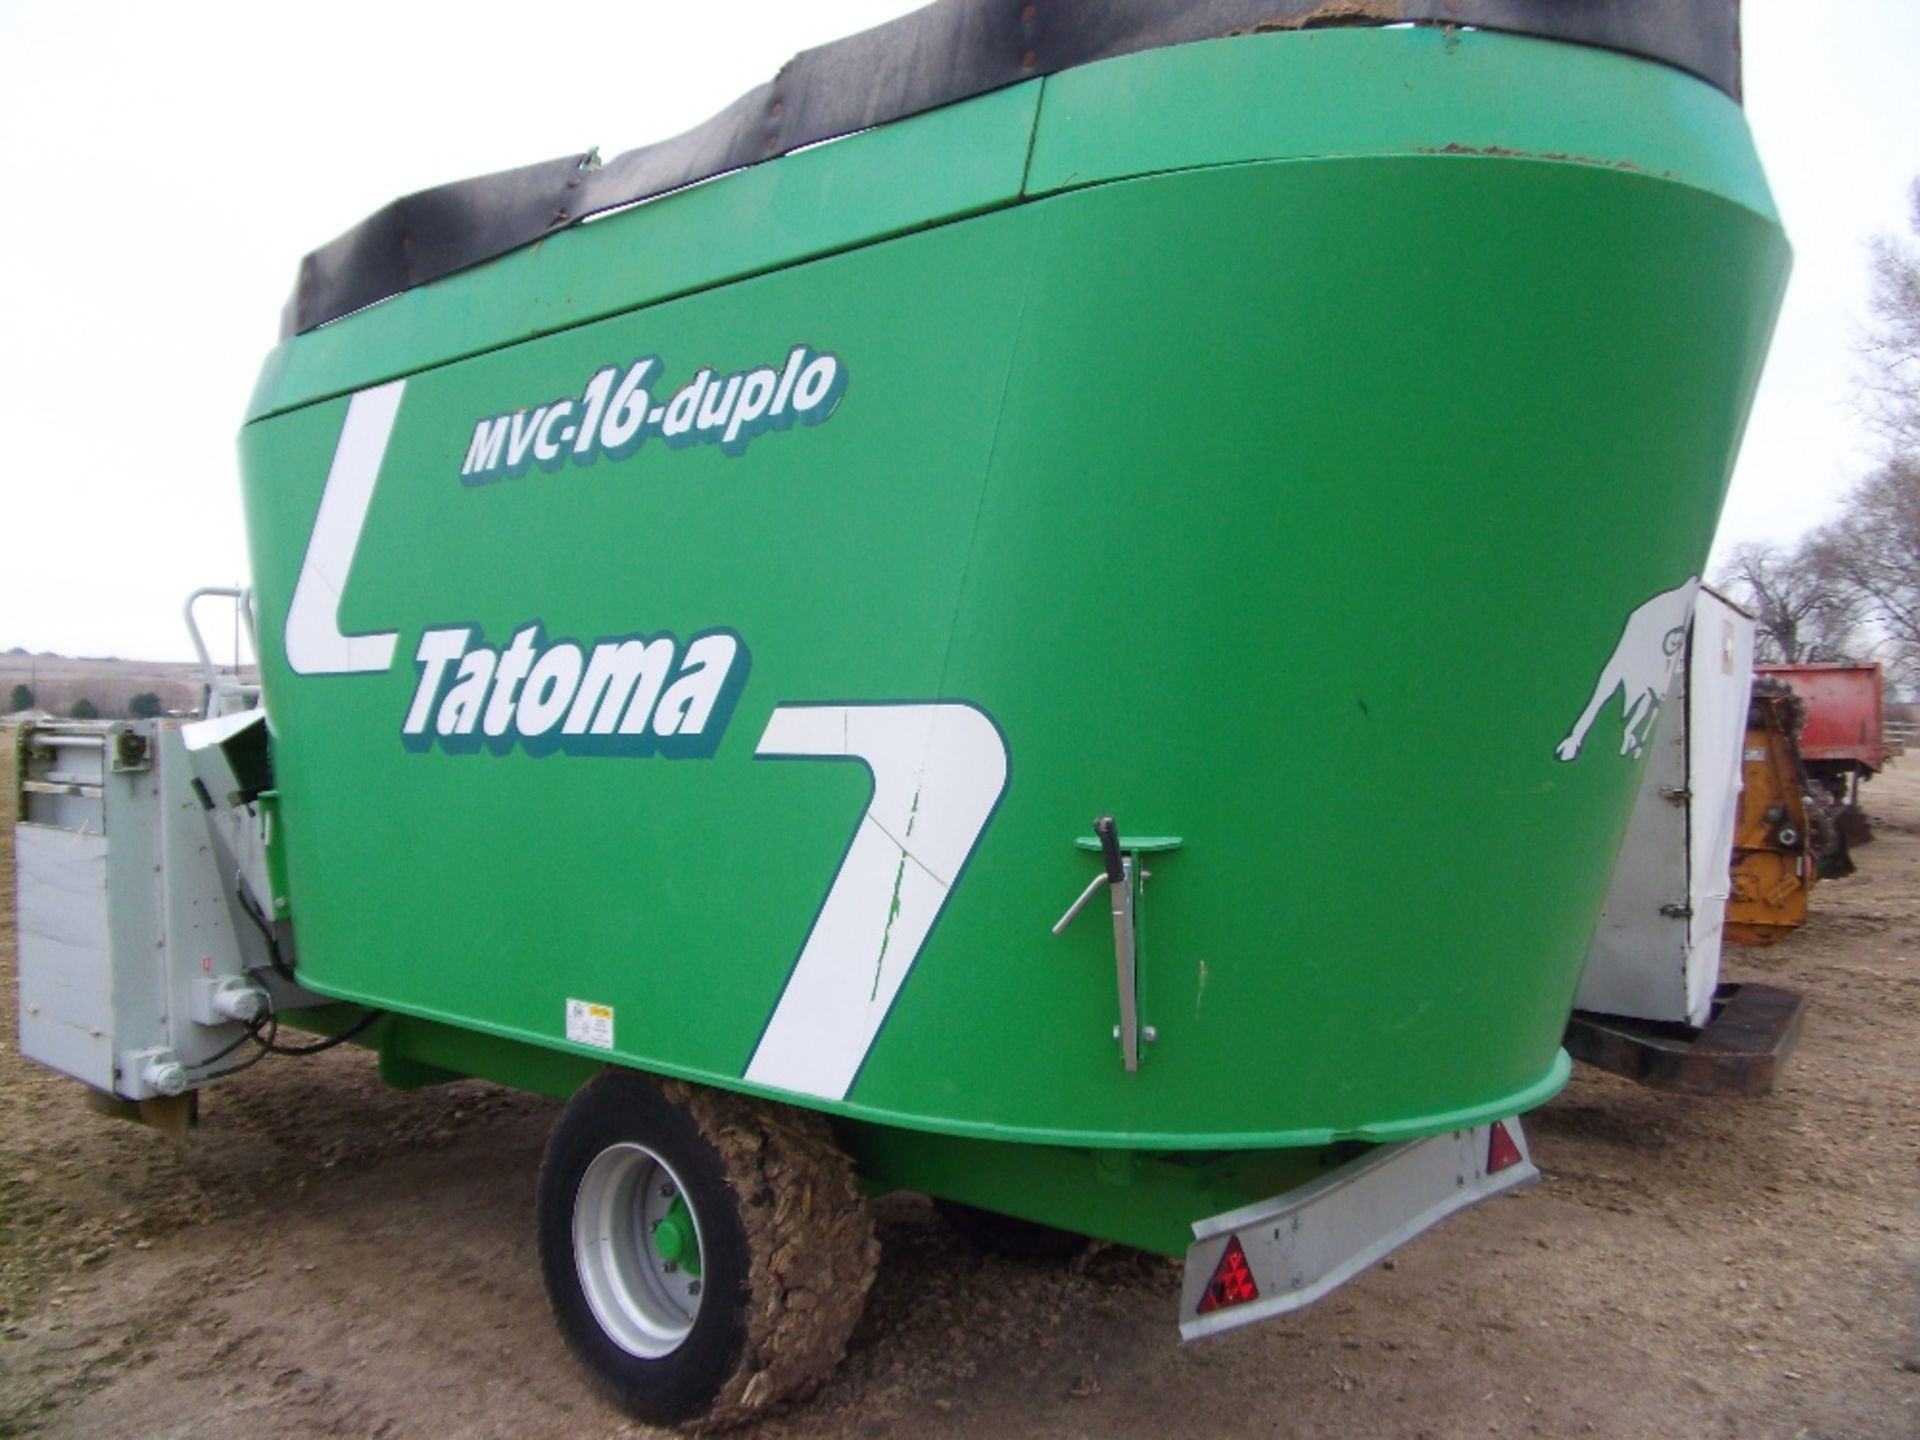 2014 Tatoma MVC 16 Duplo 725 CF twin auger vertical pto mixer feeder dual discharge new electric - Image 4 of 8